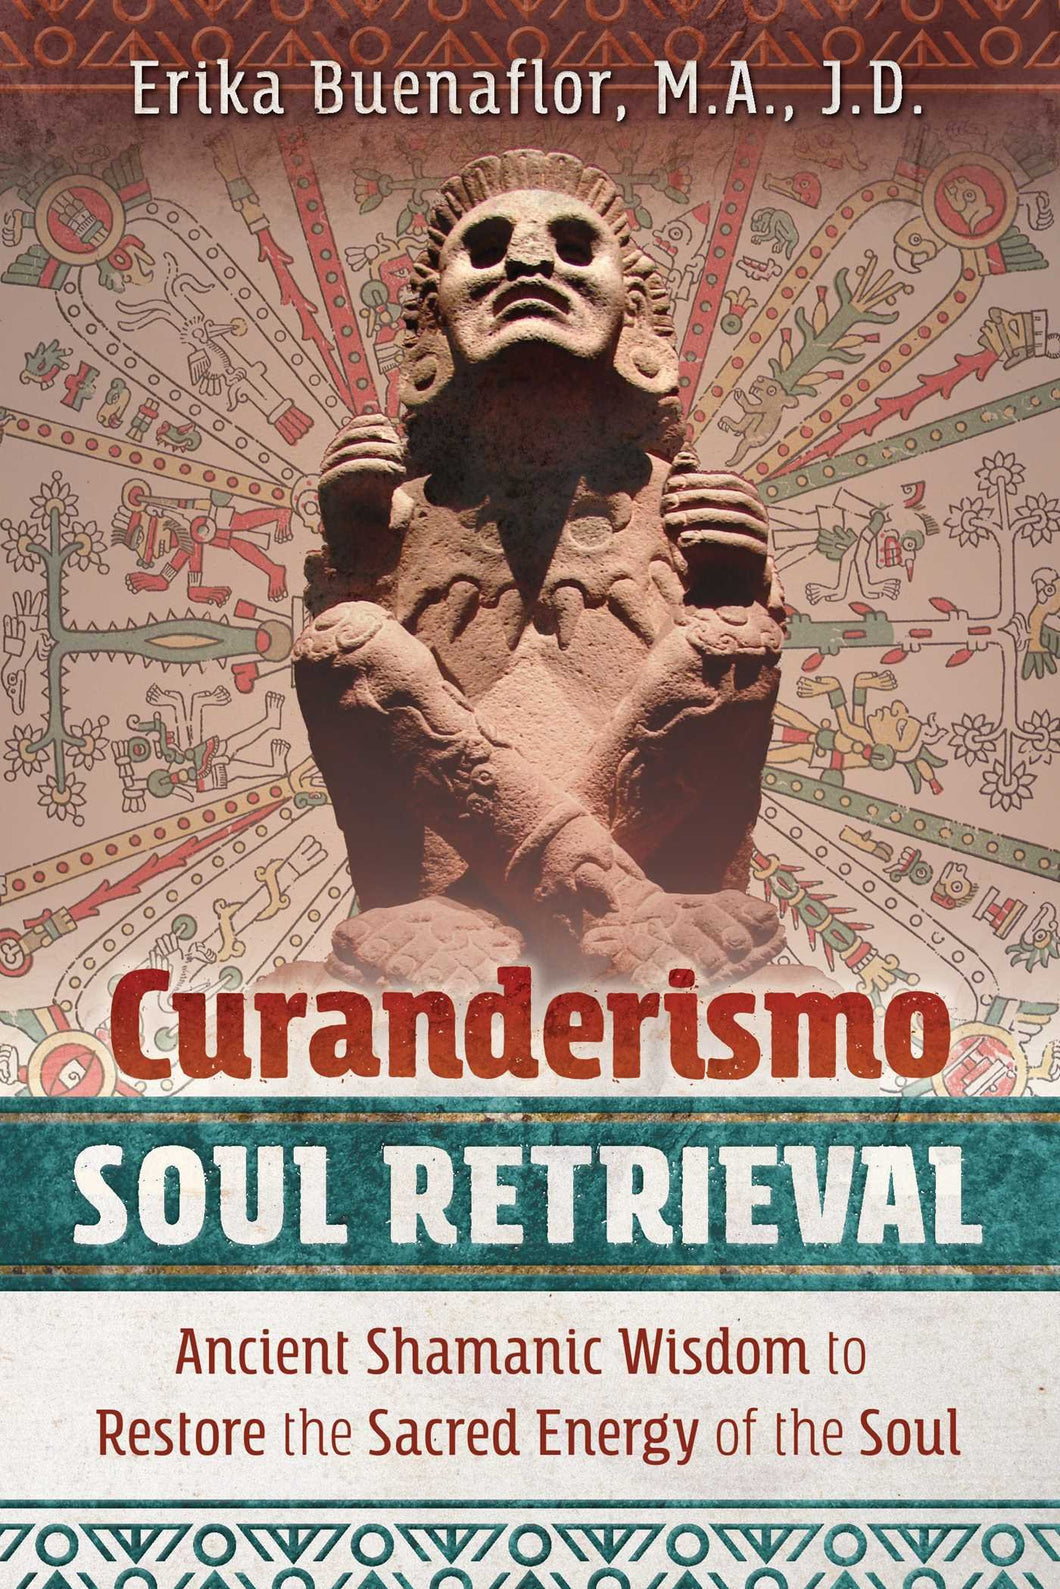 Curanderismo Soul Retrieval: Ancient Shamanic Wisdom to Restore the Sacred Energy of the Soul by Erika Buenaflor